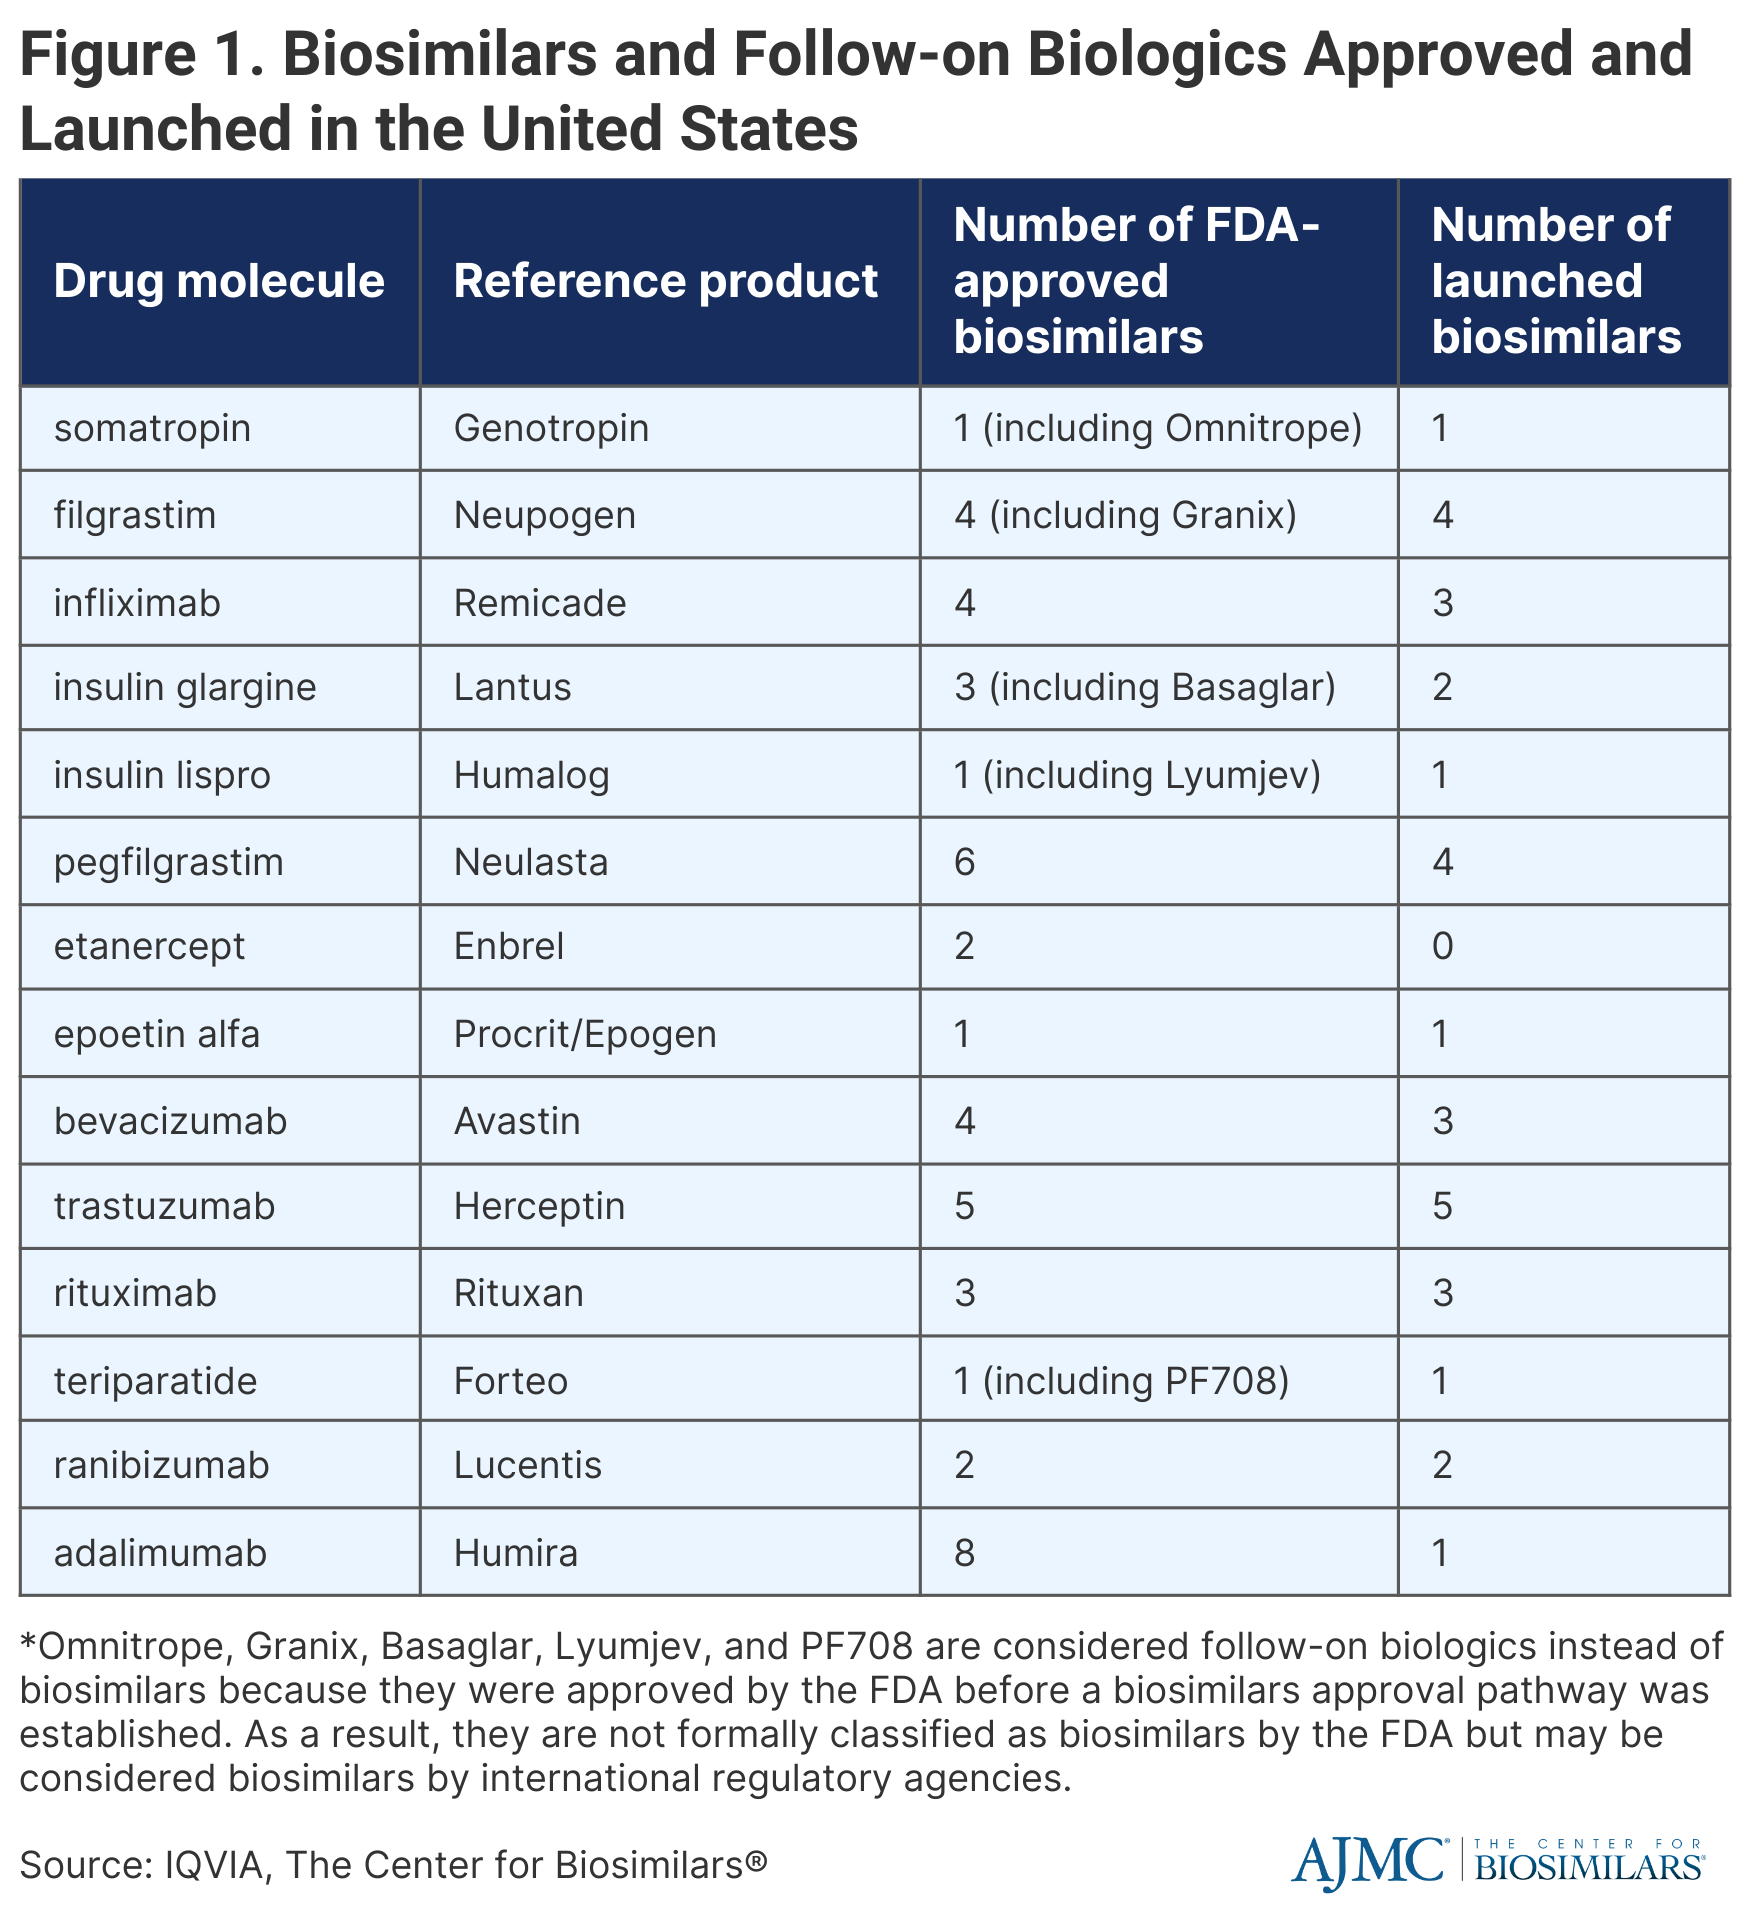 Figure 1. Biosimilars and Follow-on Biologics Approved and Launched in the United States